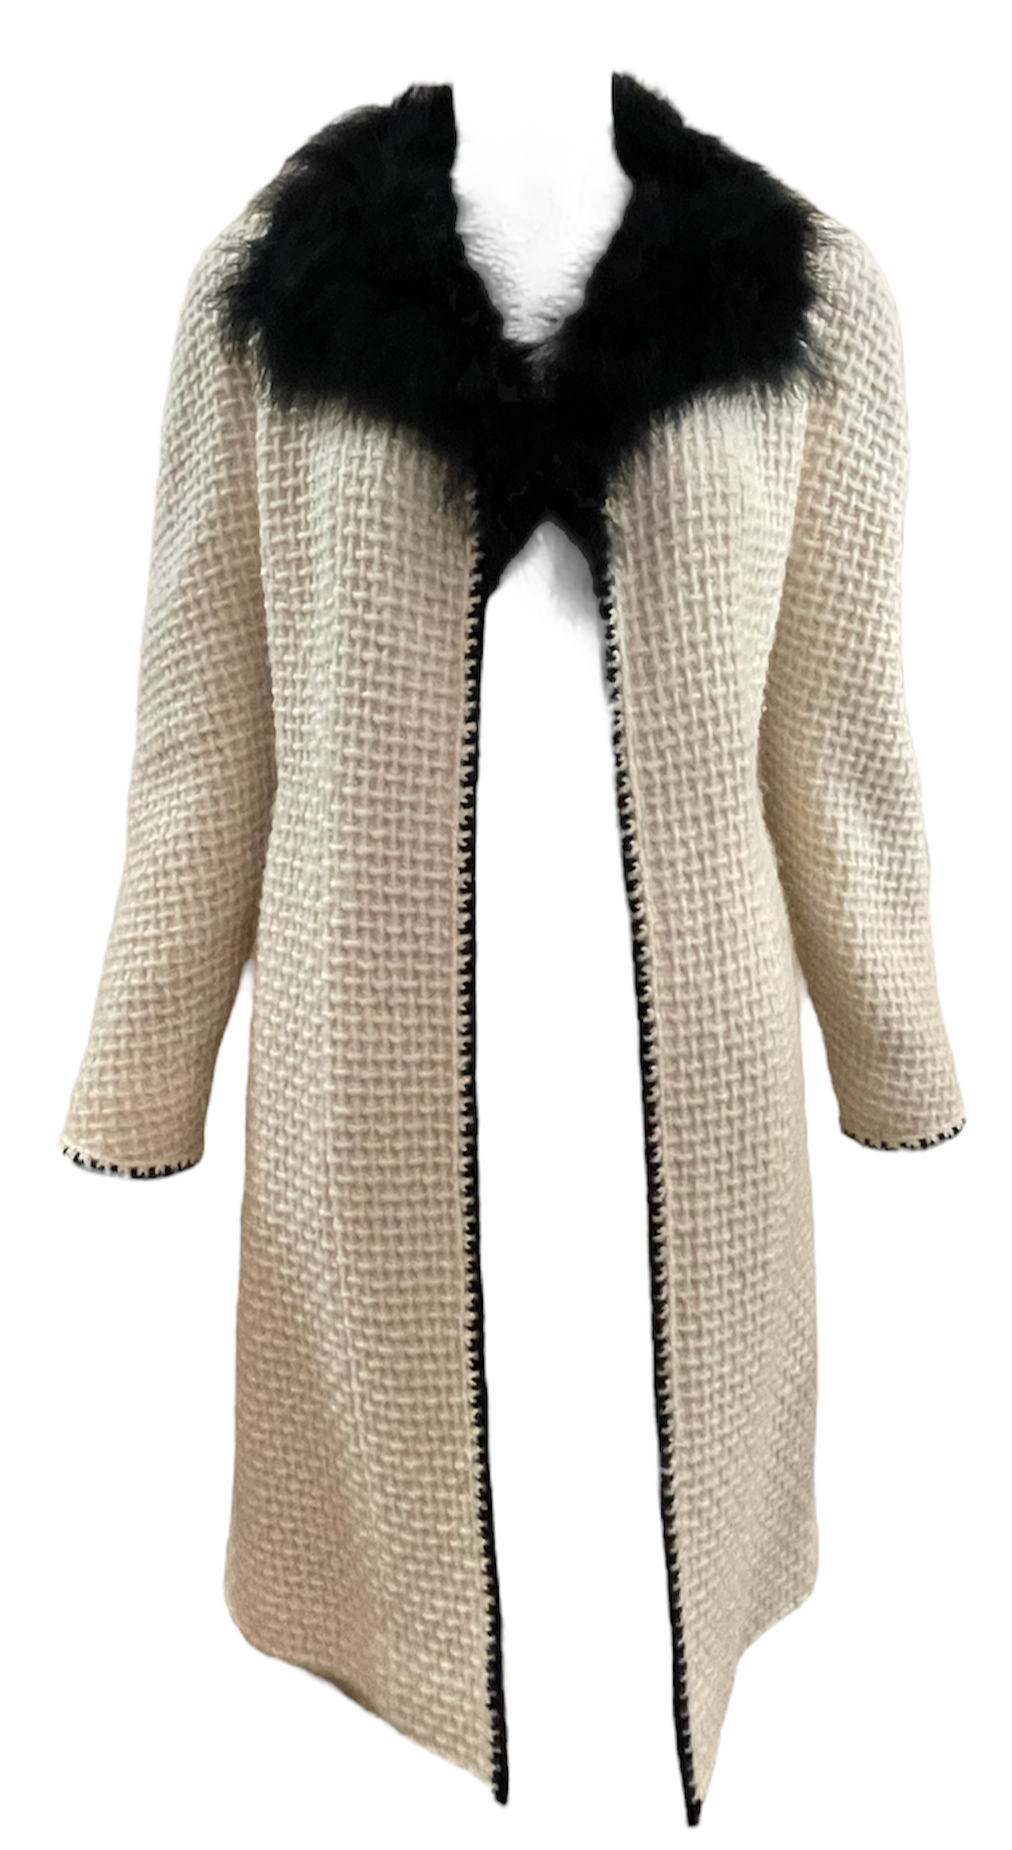 Chanel White Wool Coat with Feathered Collar – THE WAY WE WORE